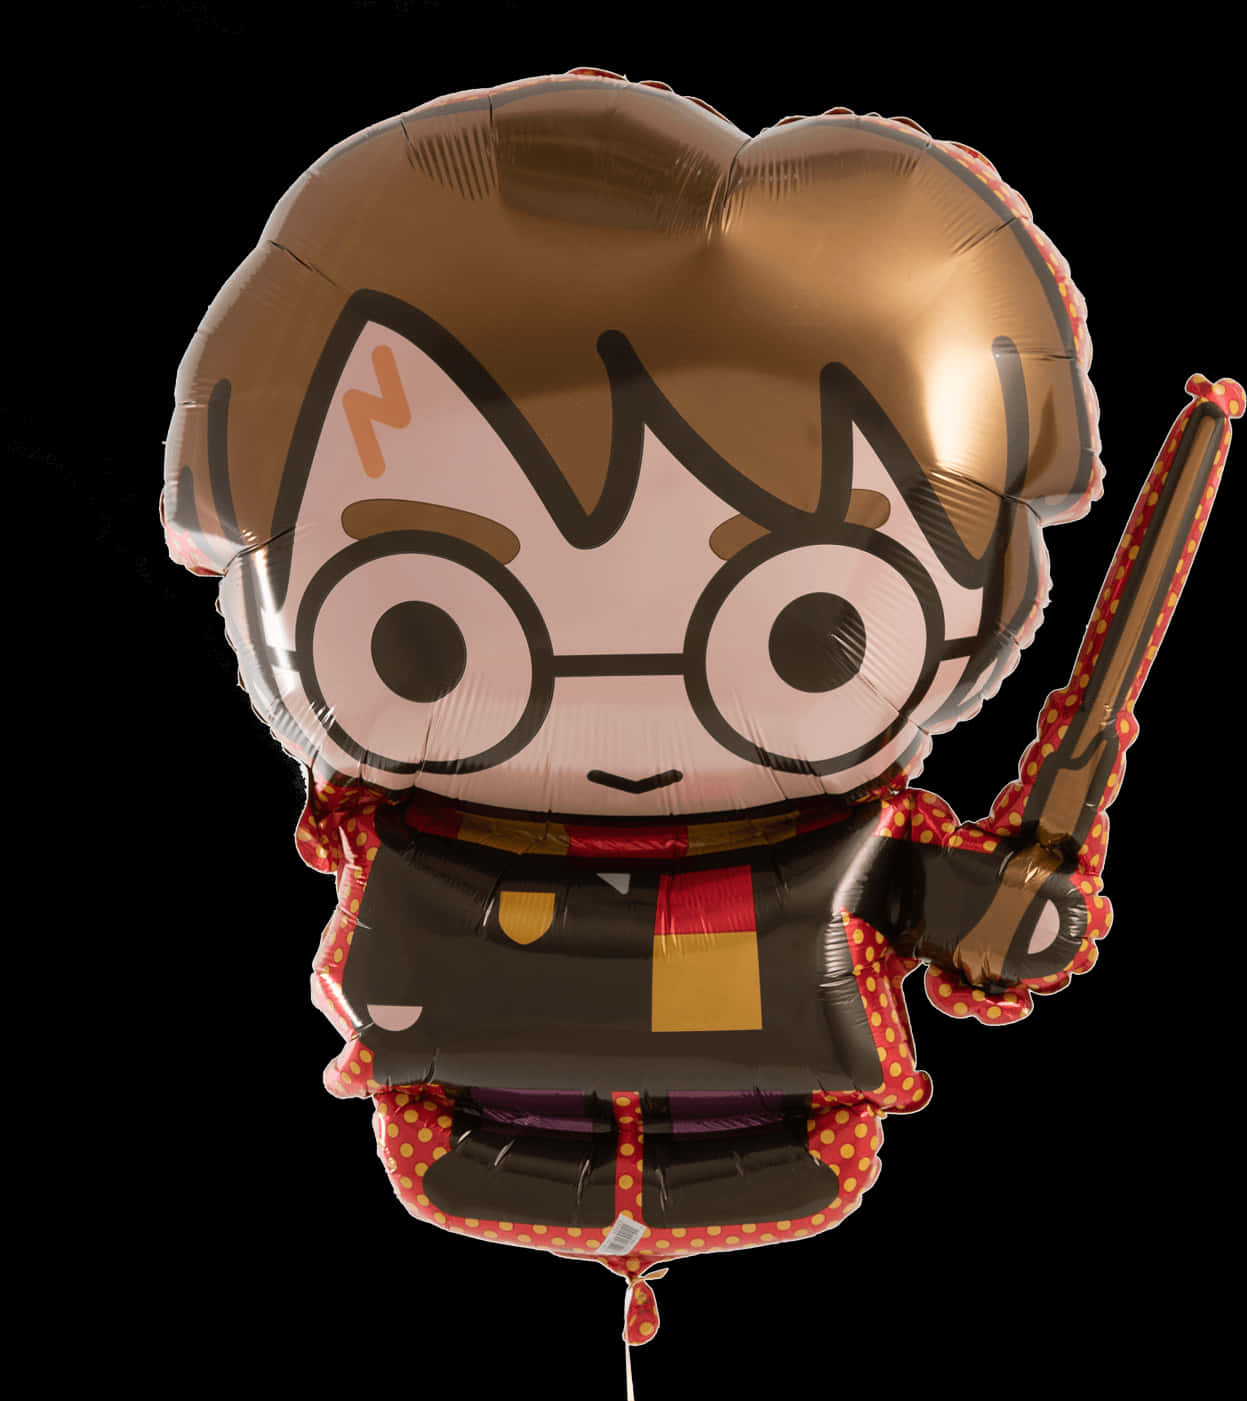 Harry Potter Character Foil Balloon